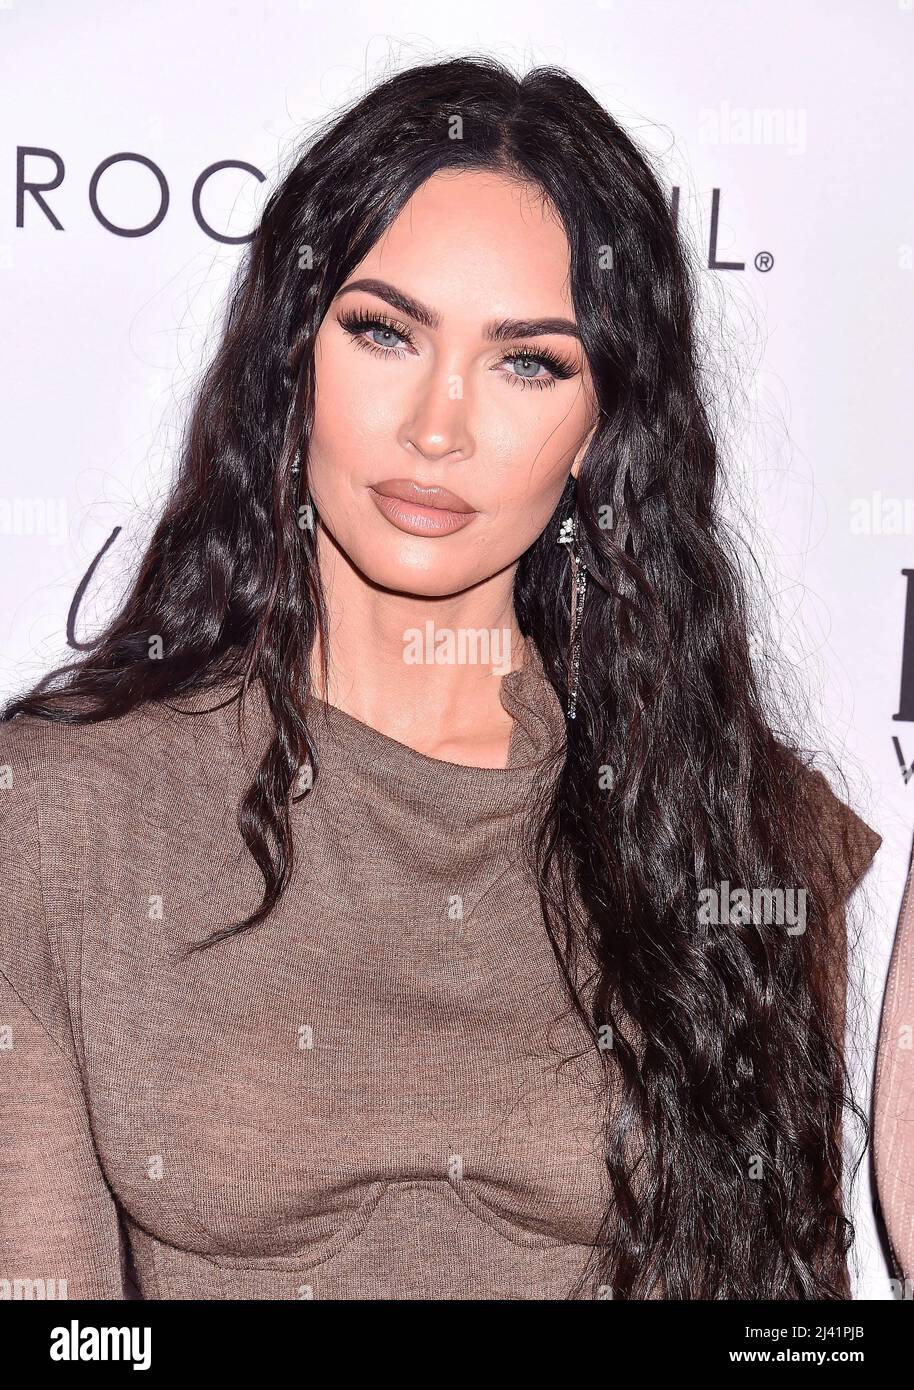 Beverly Hills, Ca. 10th Apr, 2022. Megan Fox attends The Daily Front Row's 6th Annual Fashion Los Angeles Awards at Beverly Wilshire, A Four Seasons Hotel on April 10, 2022 in Beverly Hills, California. Credit: Jeffrey Mayer/Jtm Photos/Media Punch/Alamy Live News Stock Photo